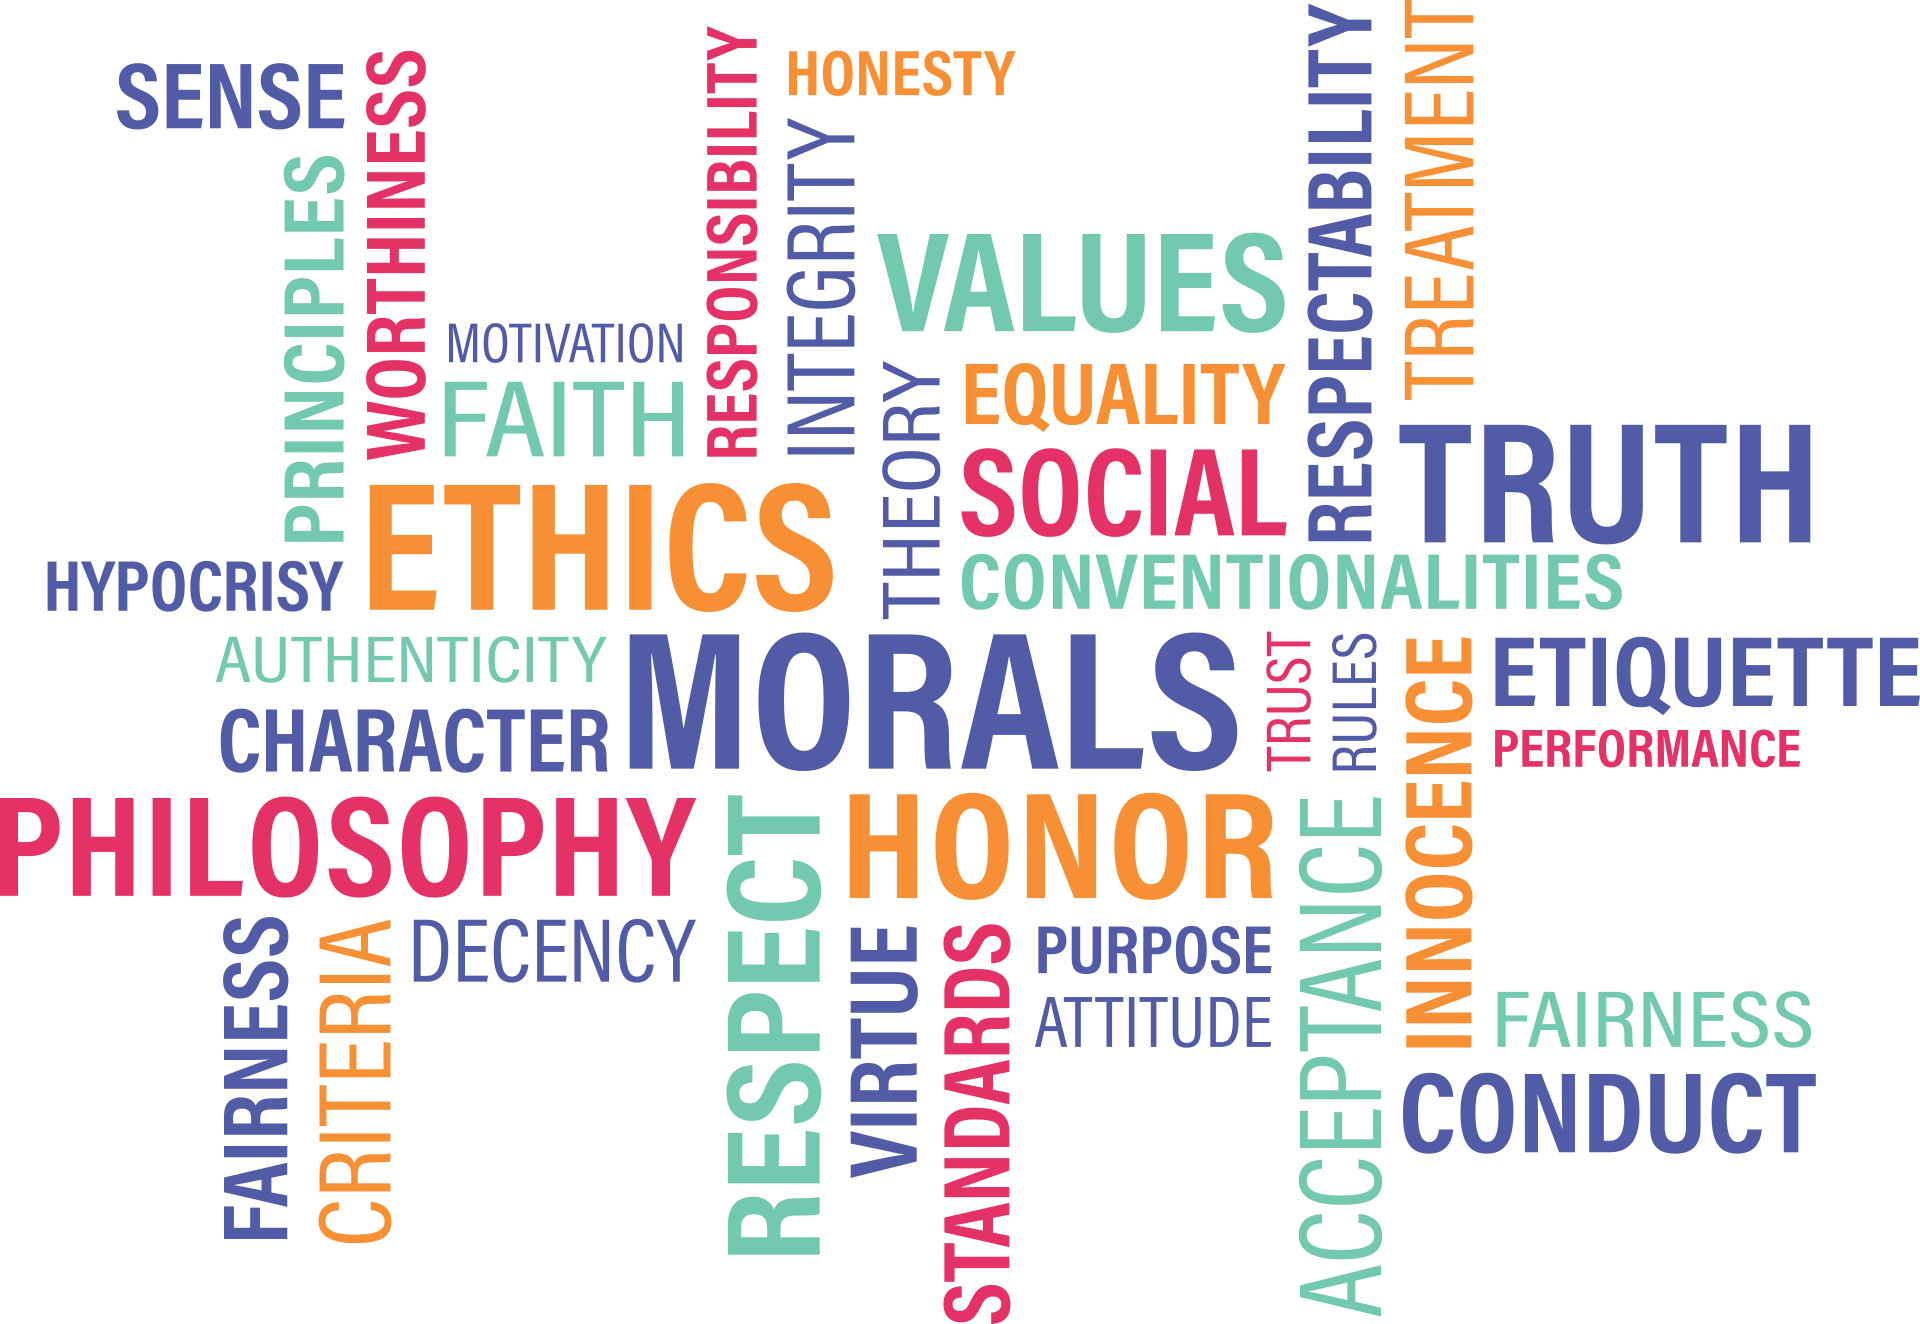 Ethics - Morals - Honor - Truth